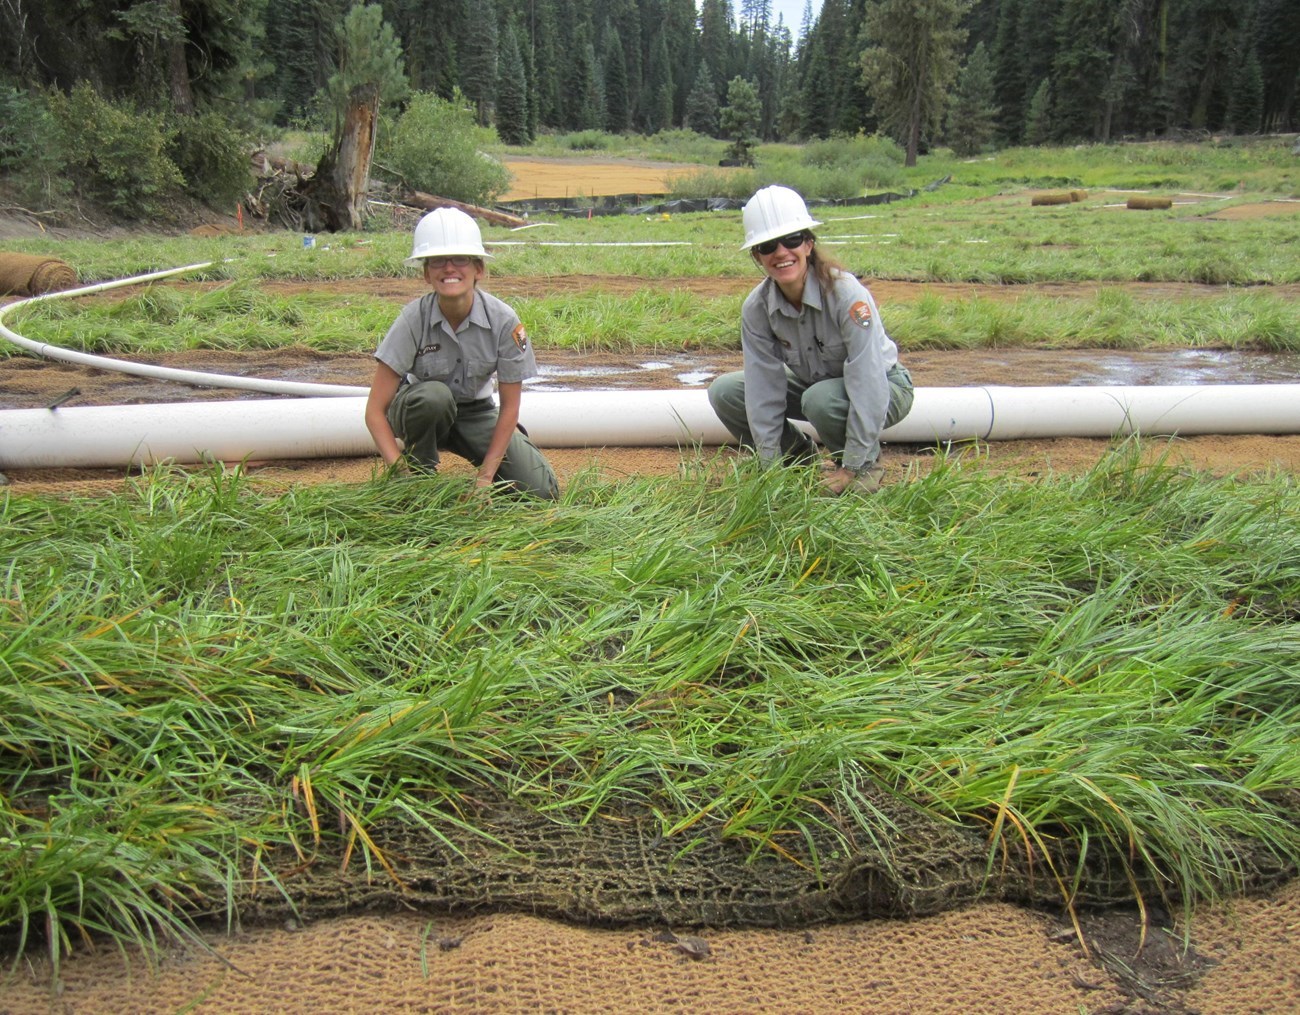 Two women in NPS uniforms and hardhats kneel in front of birght green, newly planted wetland plants in a large mountain meadow in process of being restored.